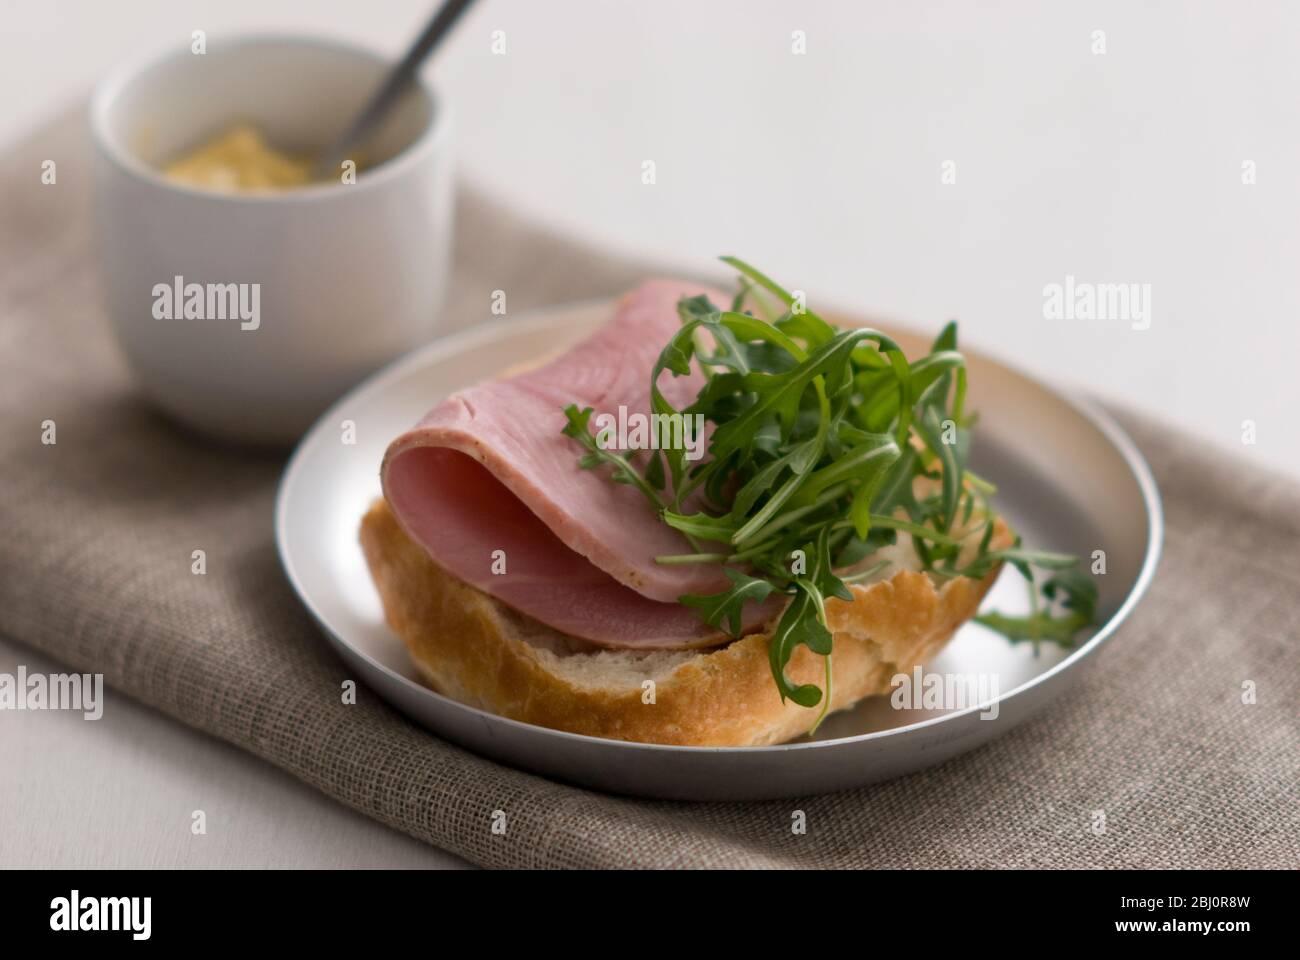 Open sandwich of crusty pain rustique roll, with thick slice of quality ham and rocket salad leaf garnish, with small pot of Dijon mustard - Stock Photo